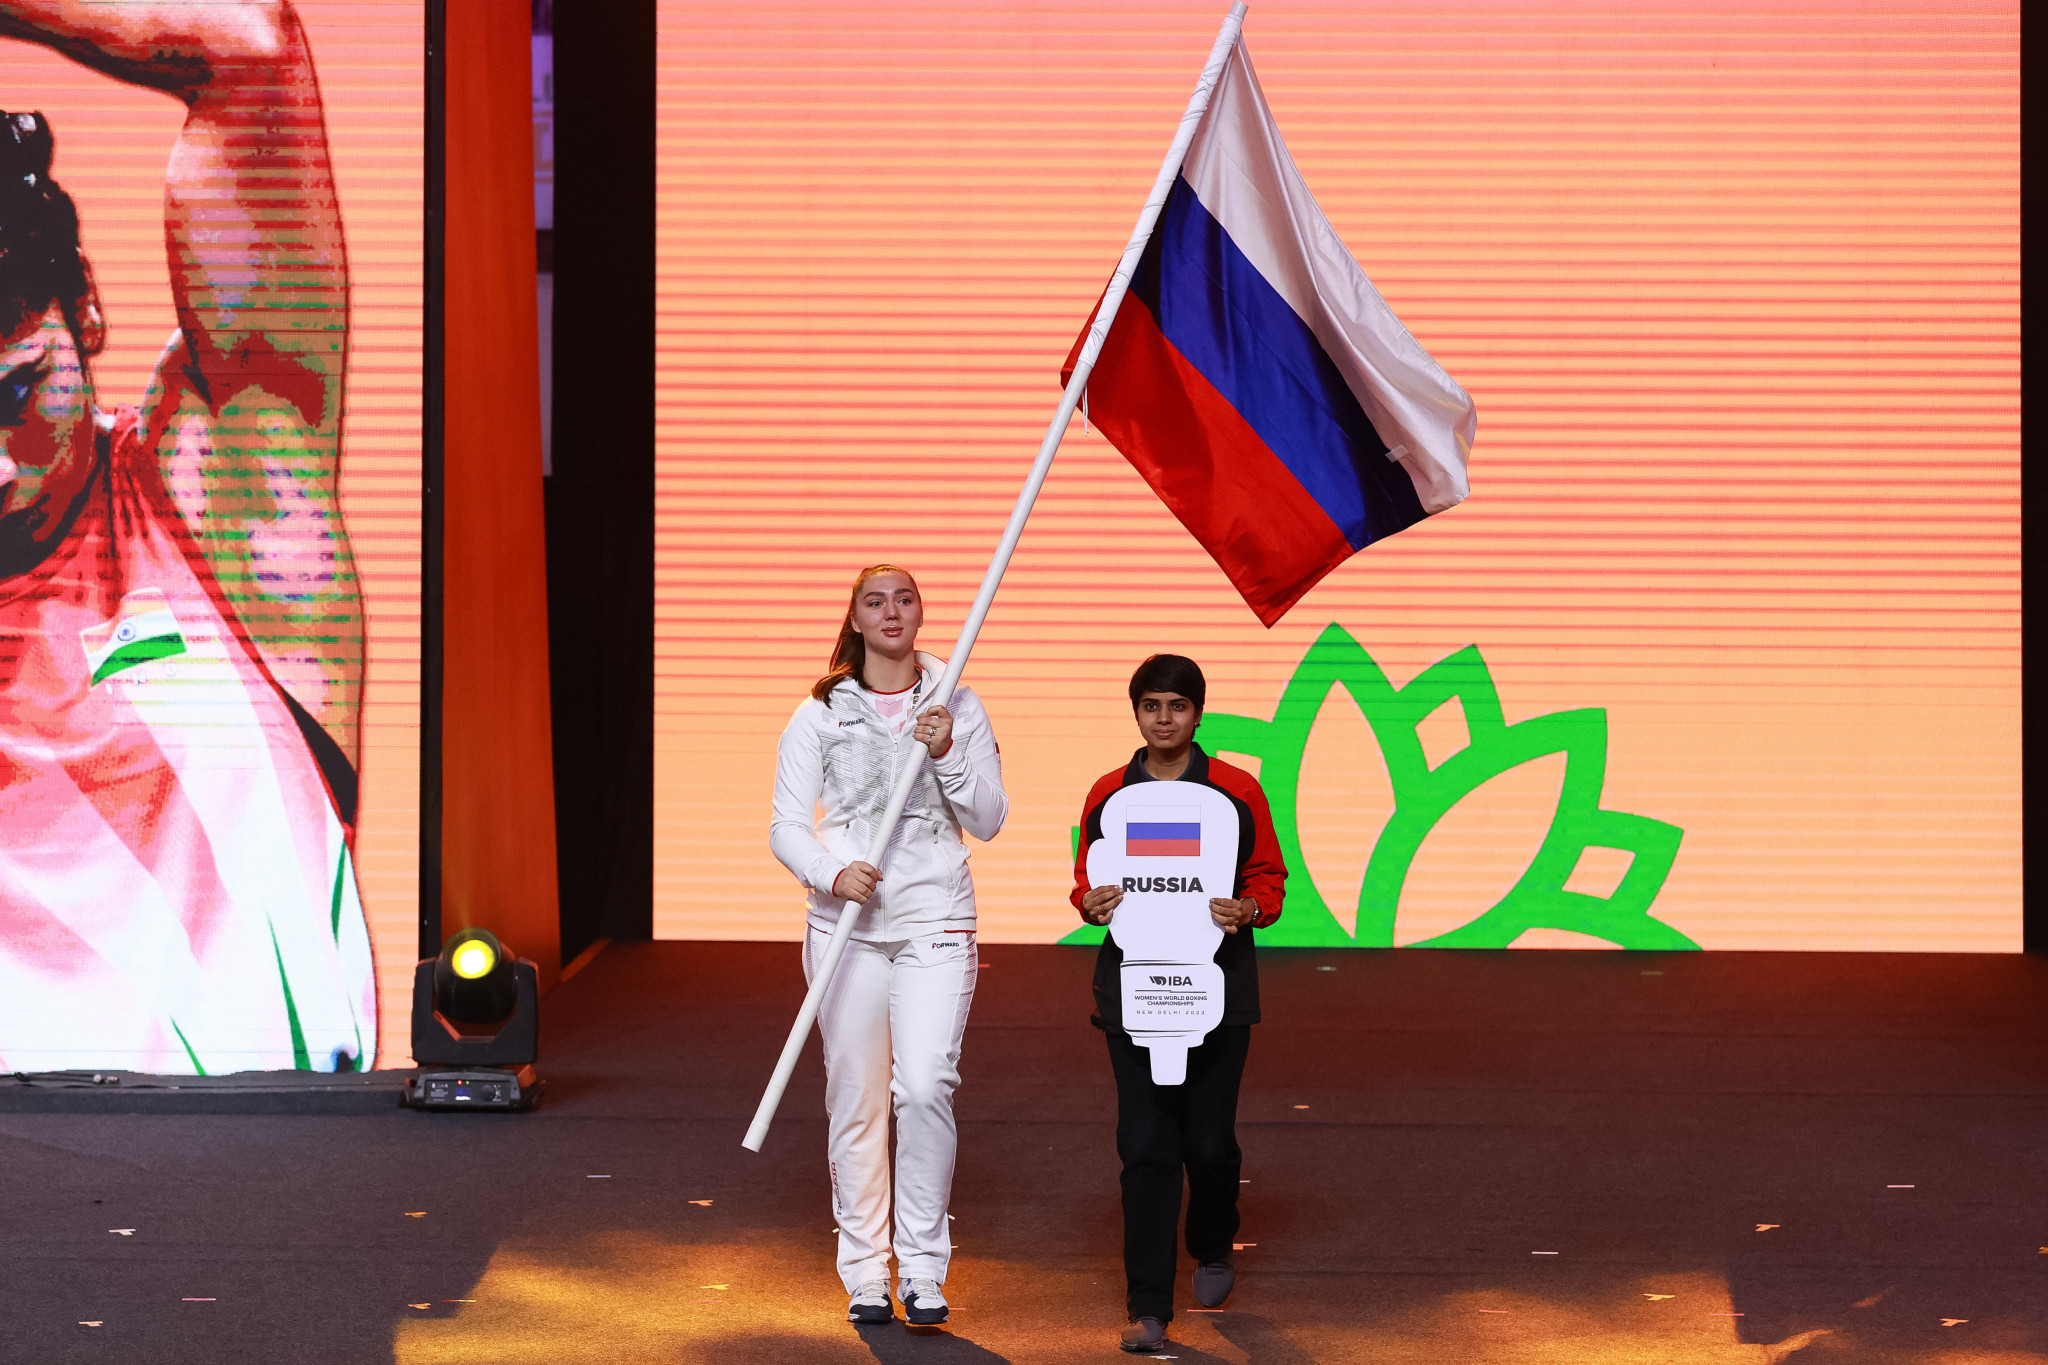 Diana Pyatak, making her debut at the Women’s World Championships, was chosen to carry Russia's flag at the Opening Ceremony ©IBA